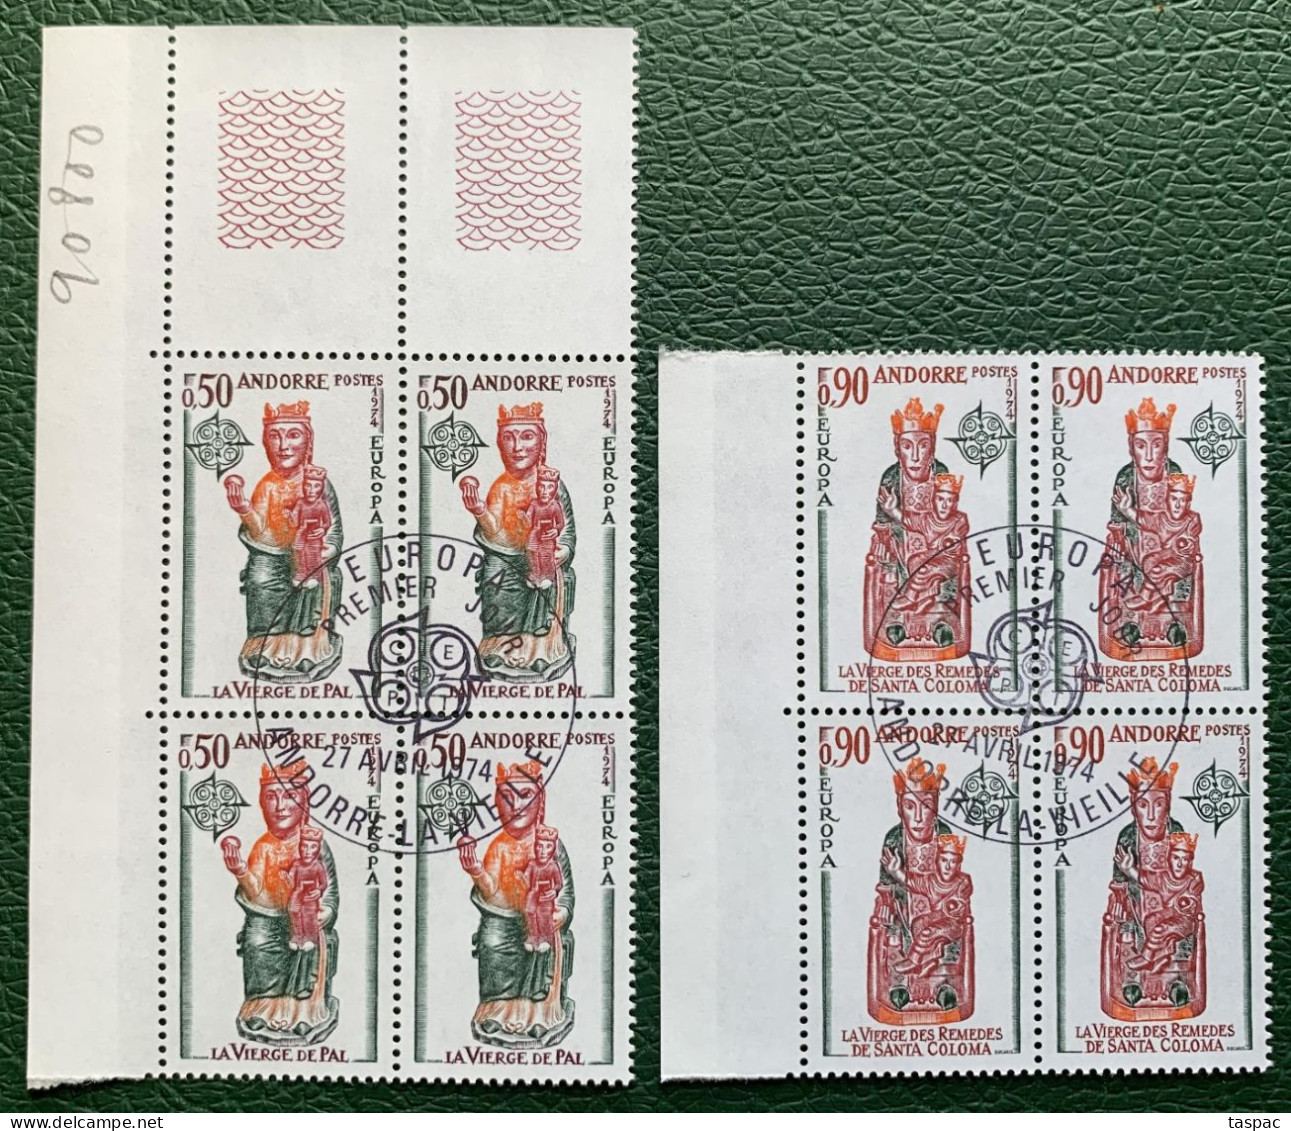 French Andorra 1974 Mi# 258-259 Used - Set In Blocks Of 4 - Europa / Sculptures / Madonna - Used Stamps